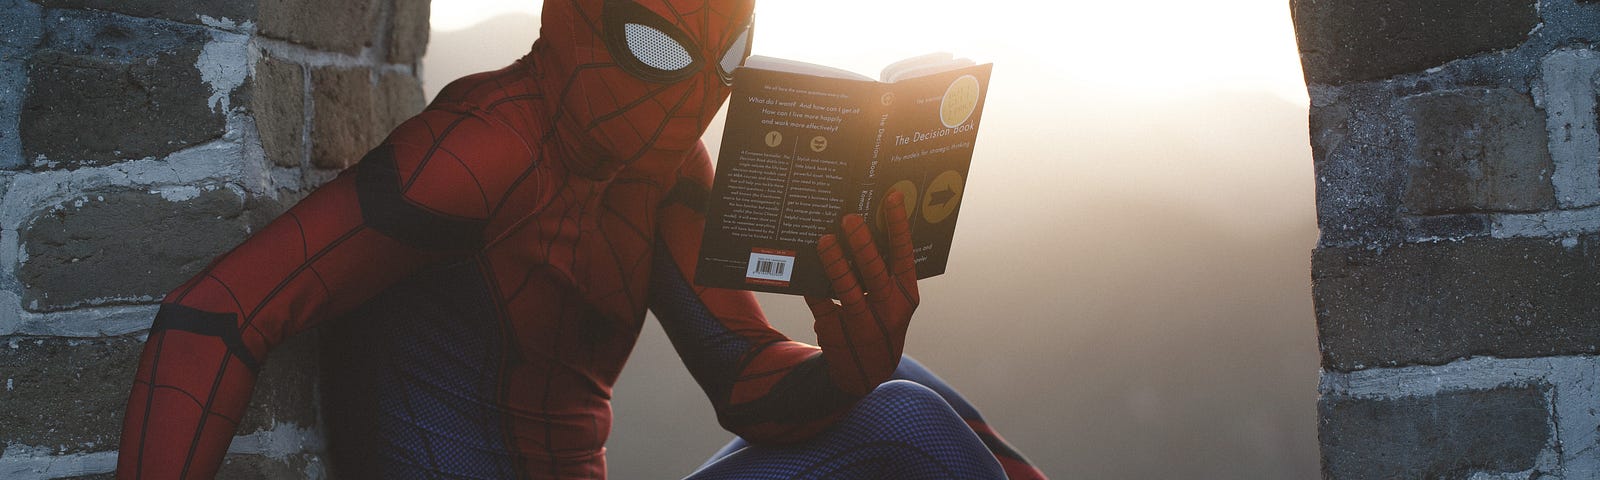 The image is that of superhero, spider man, sitting on wall reading a book.